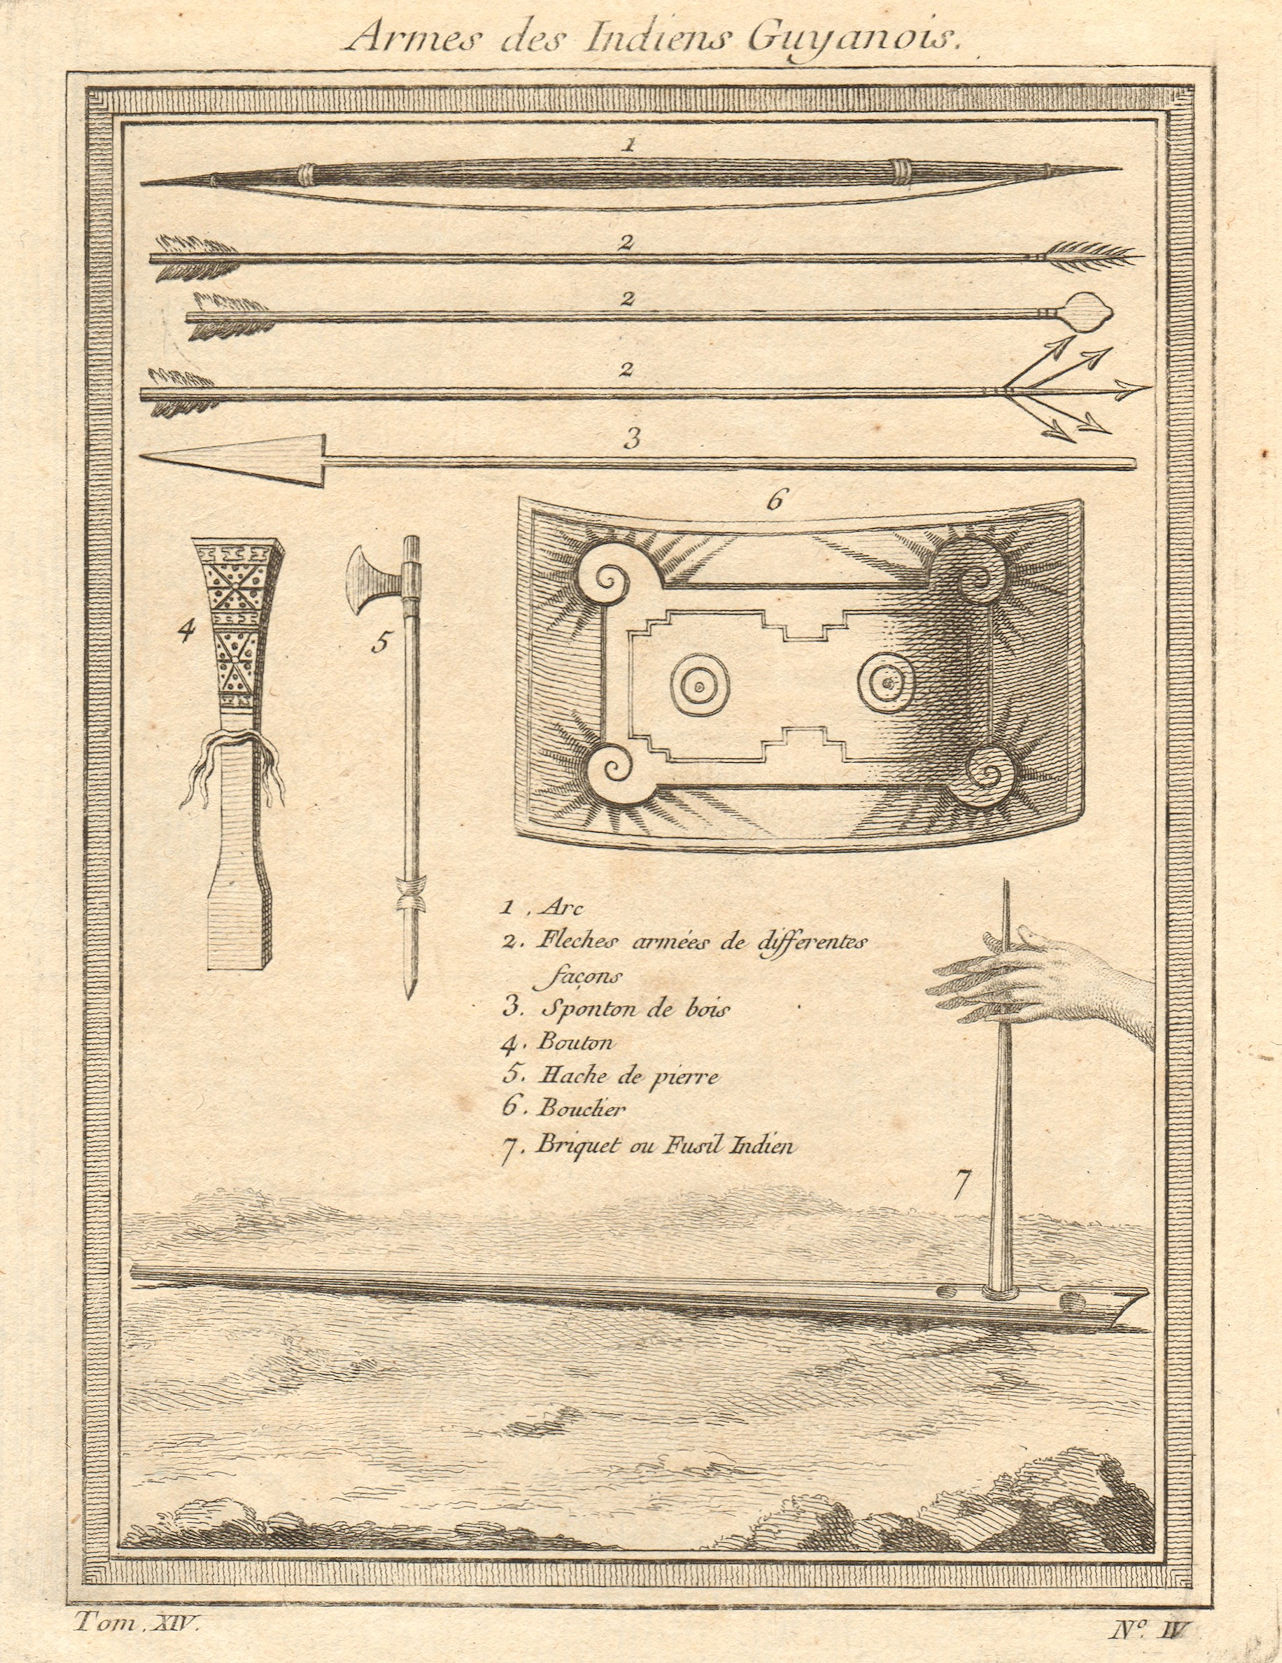 Associate Product 'Armes des Indiens Guyanois'. Guyanas Native American Indians' weapons 1757